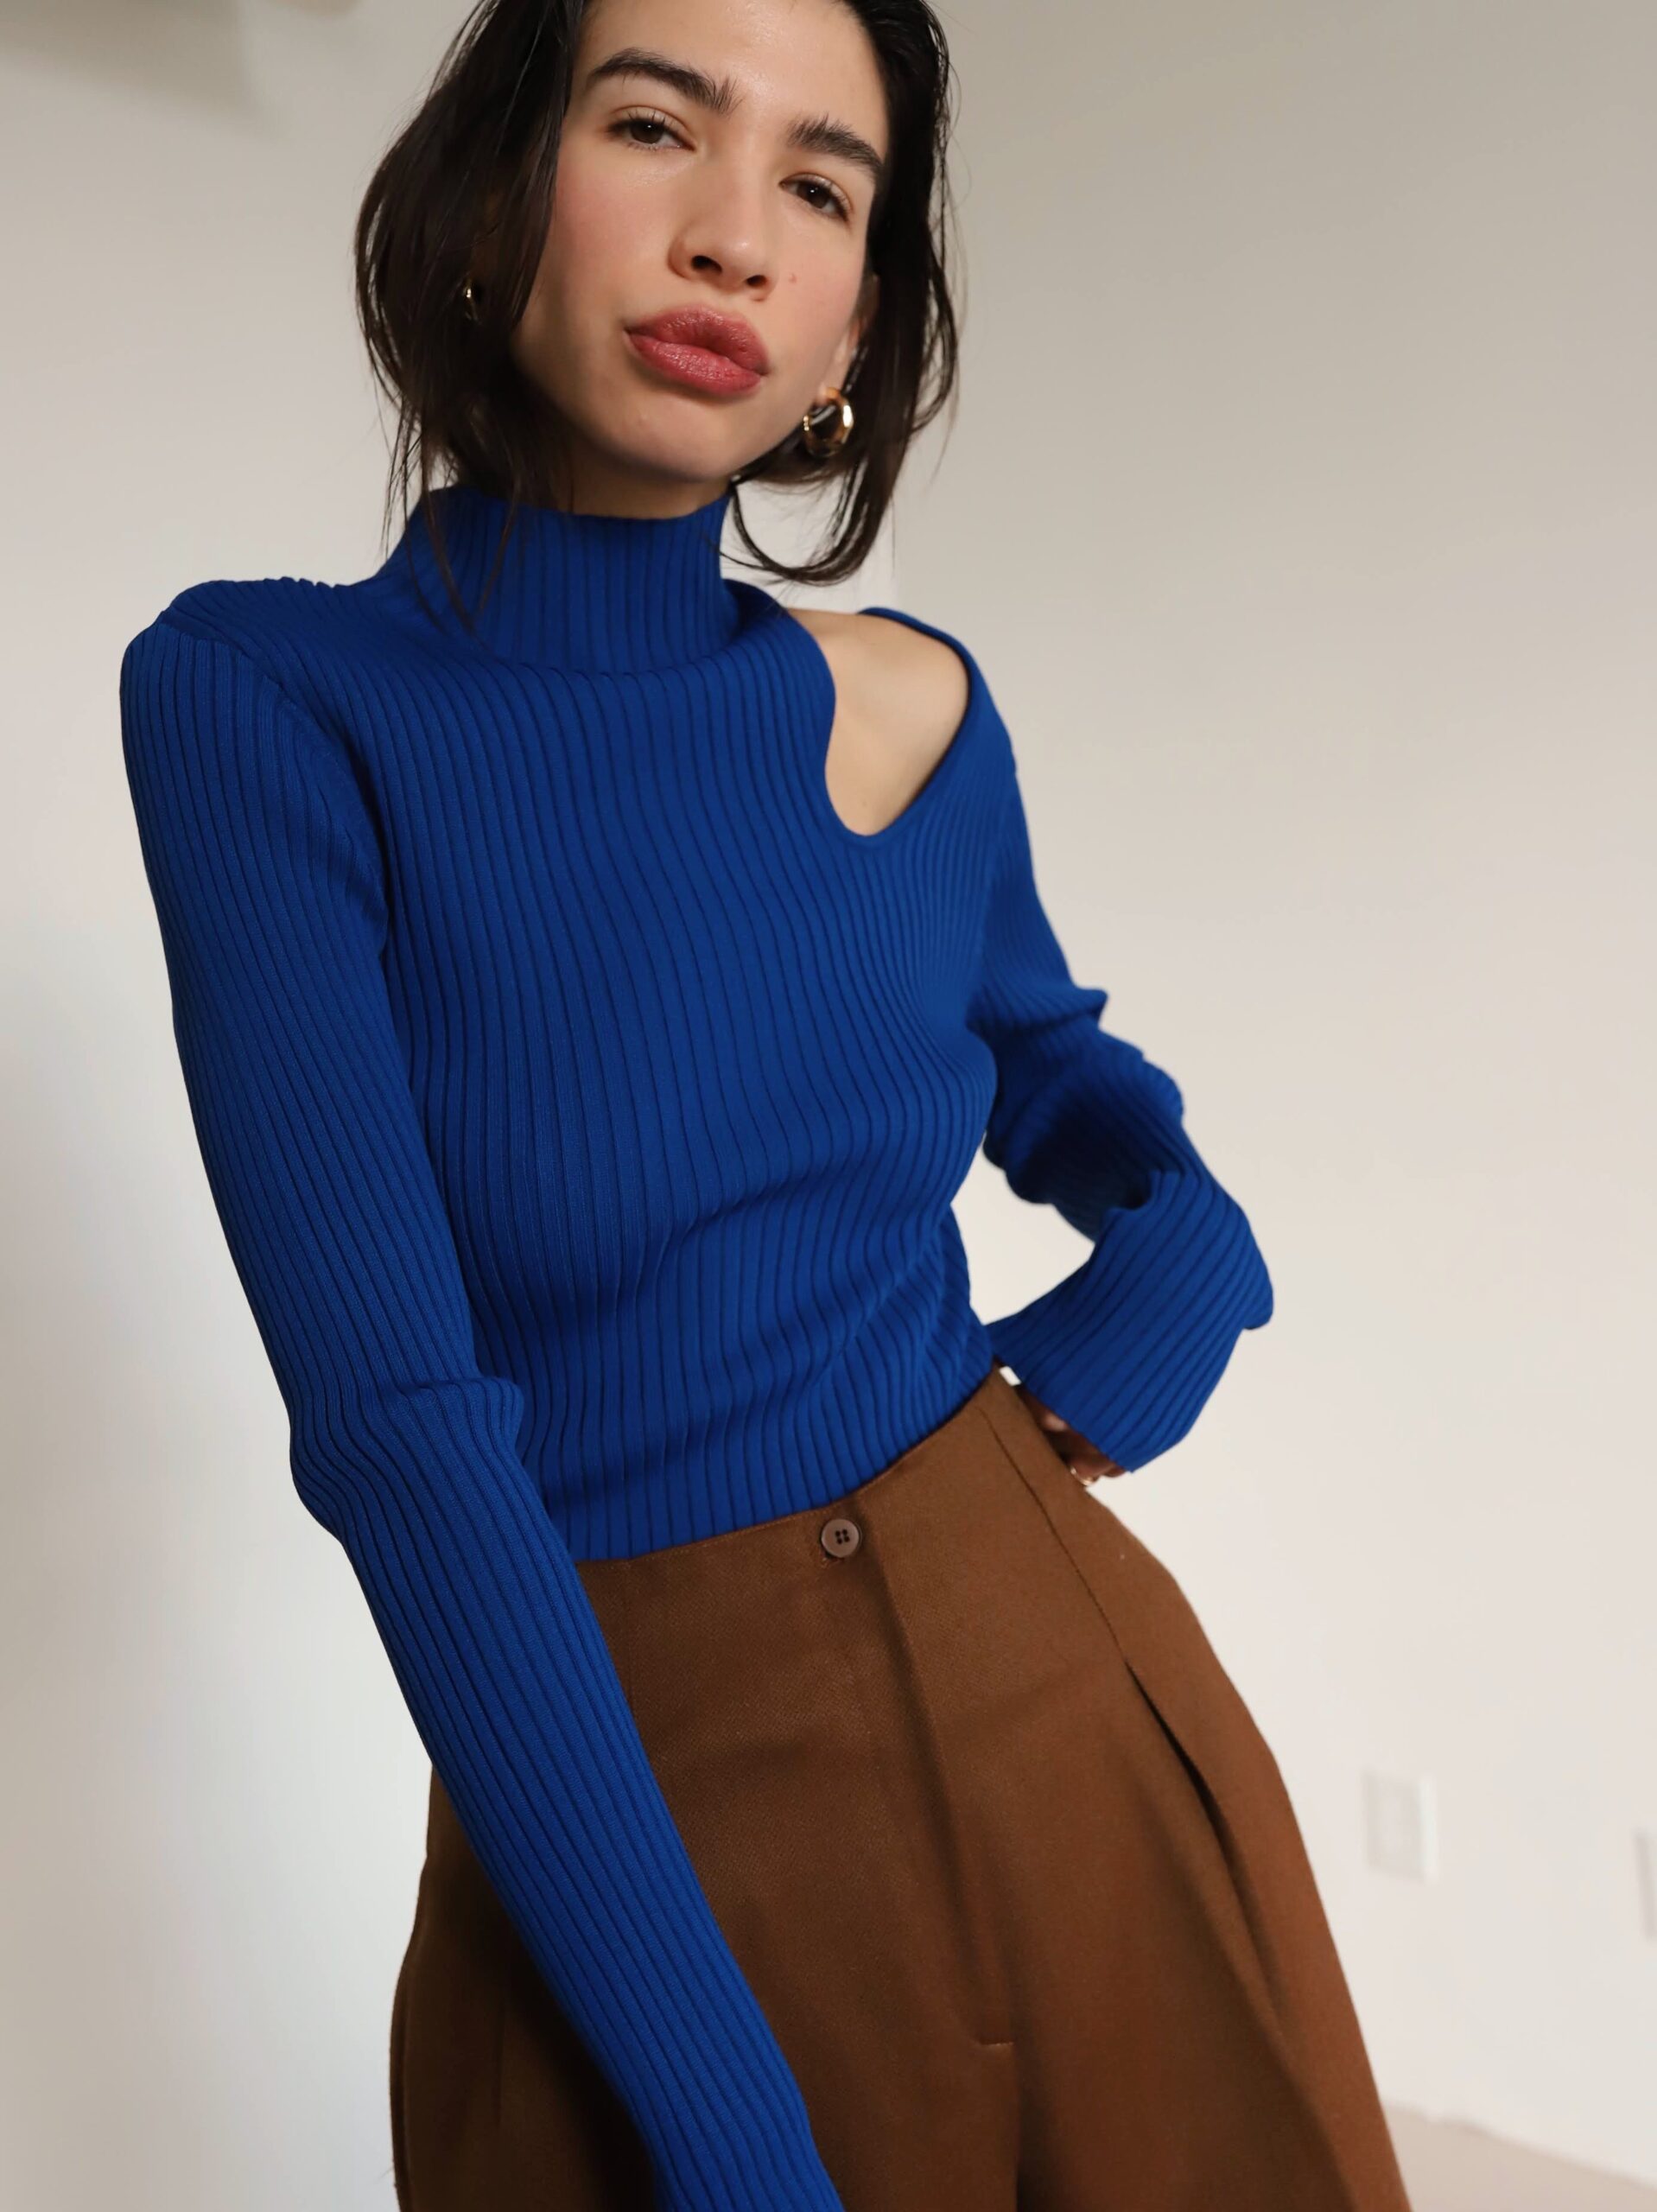 Transform Your Wardrobe with Stunning Cobalt Blue Pants Outfits